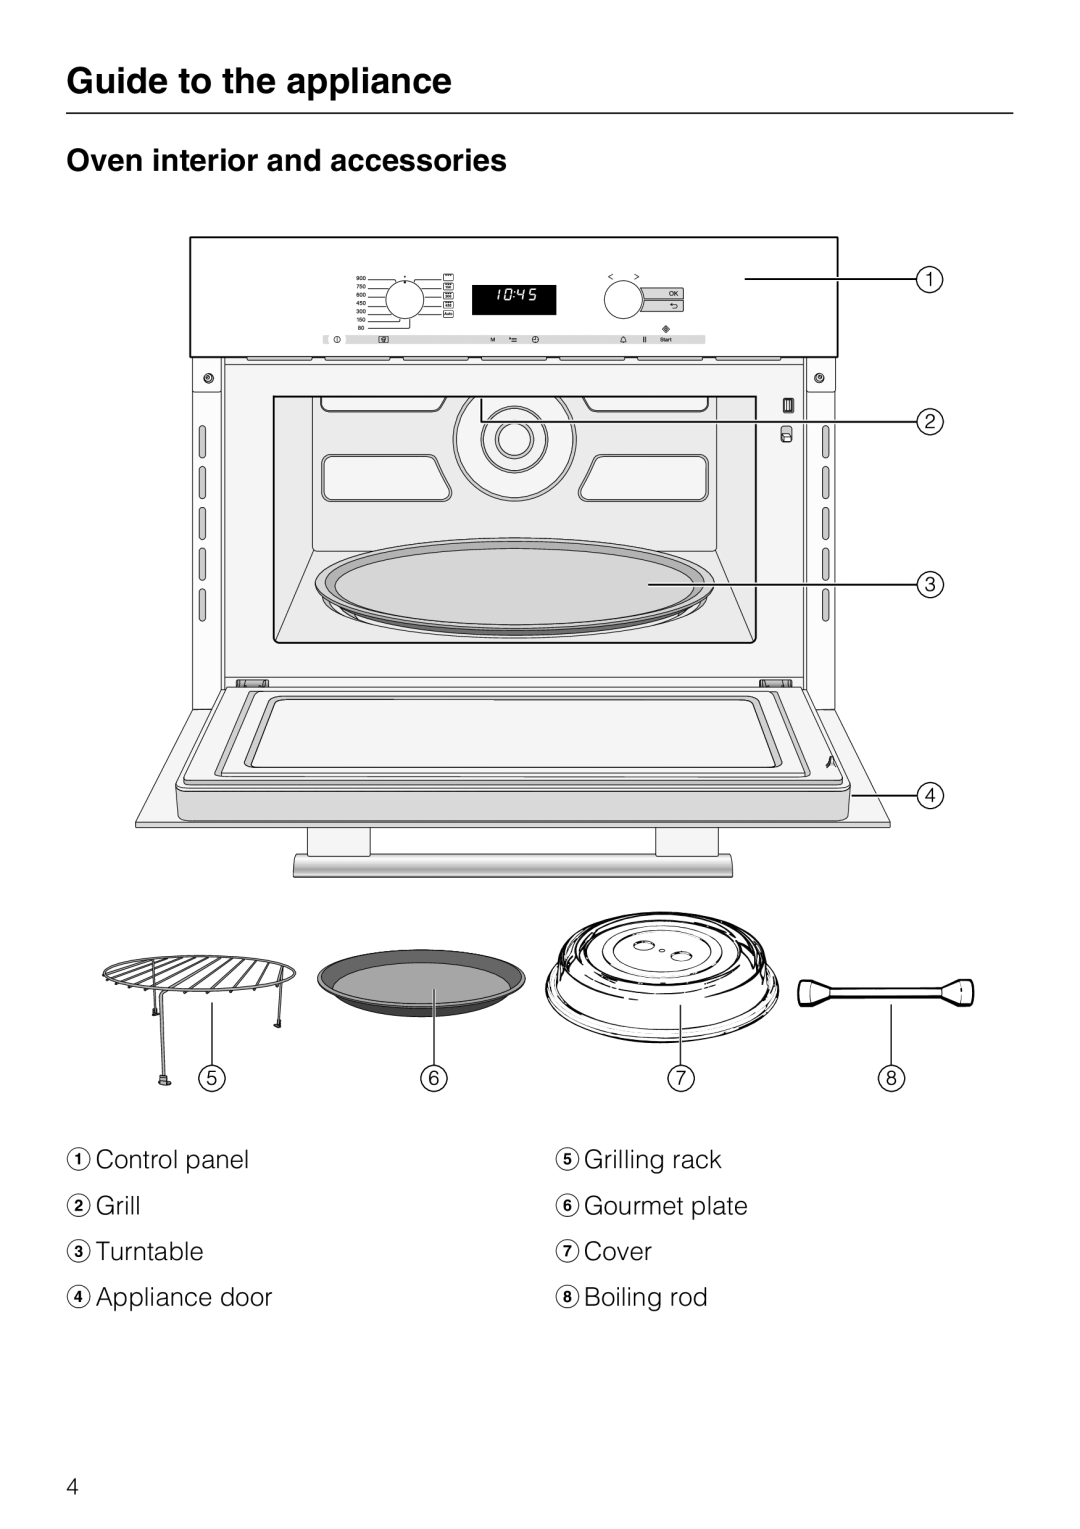 Miele 09 919 100 operating instructions Guide to the appliance, Oven interior and accessories 